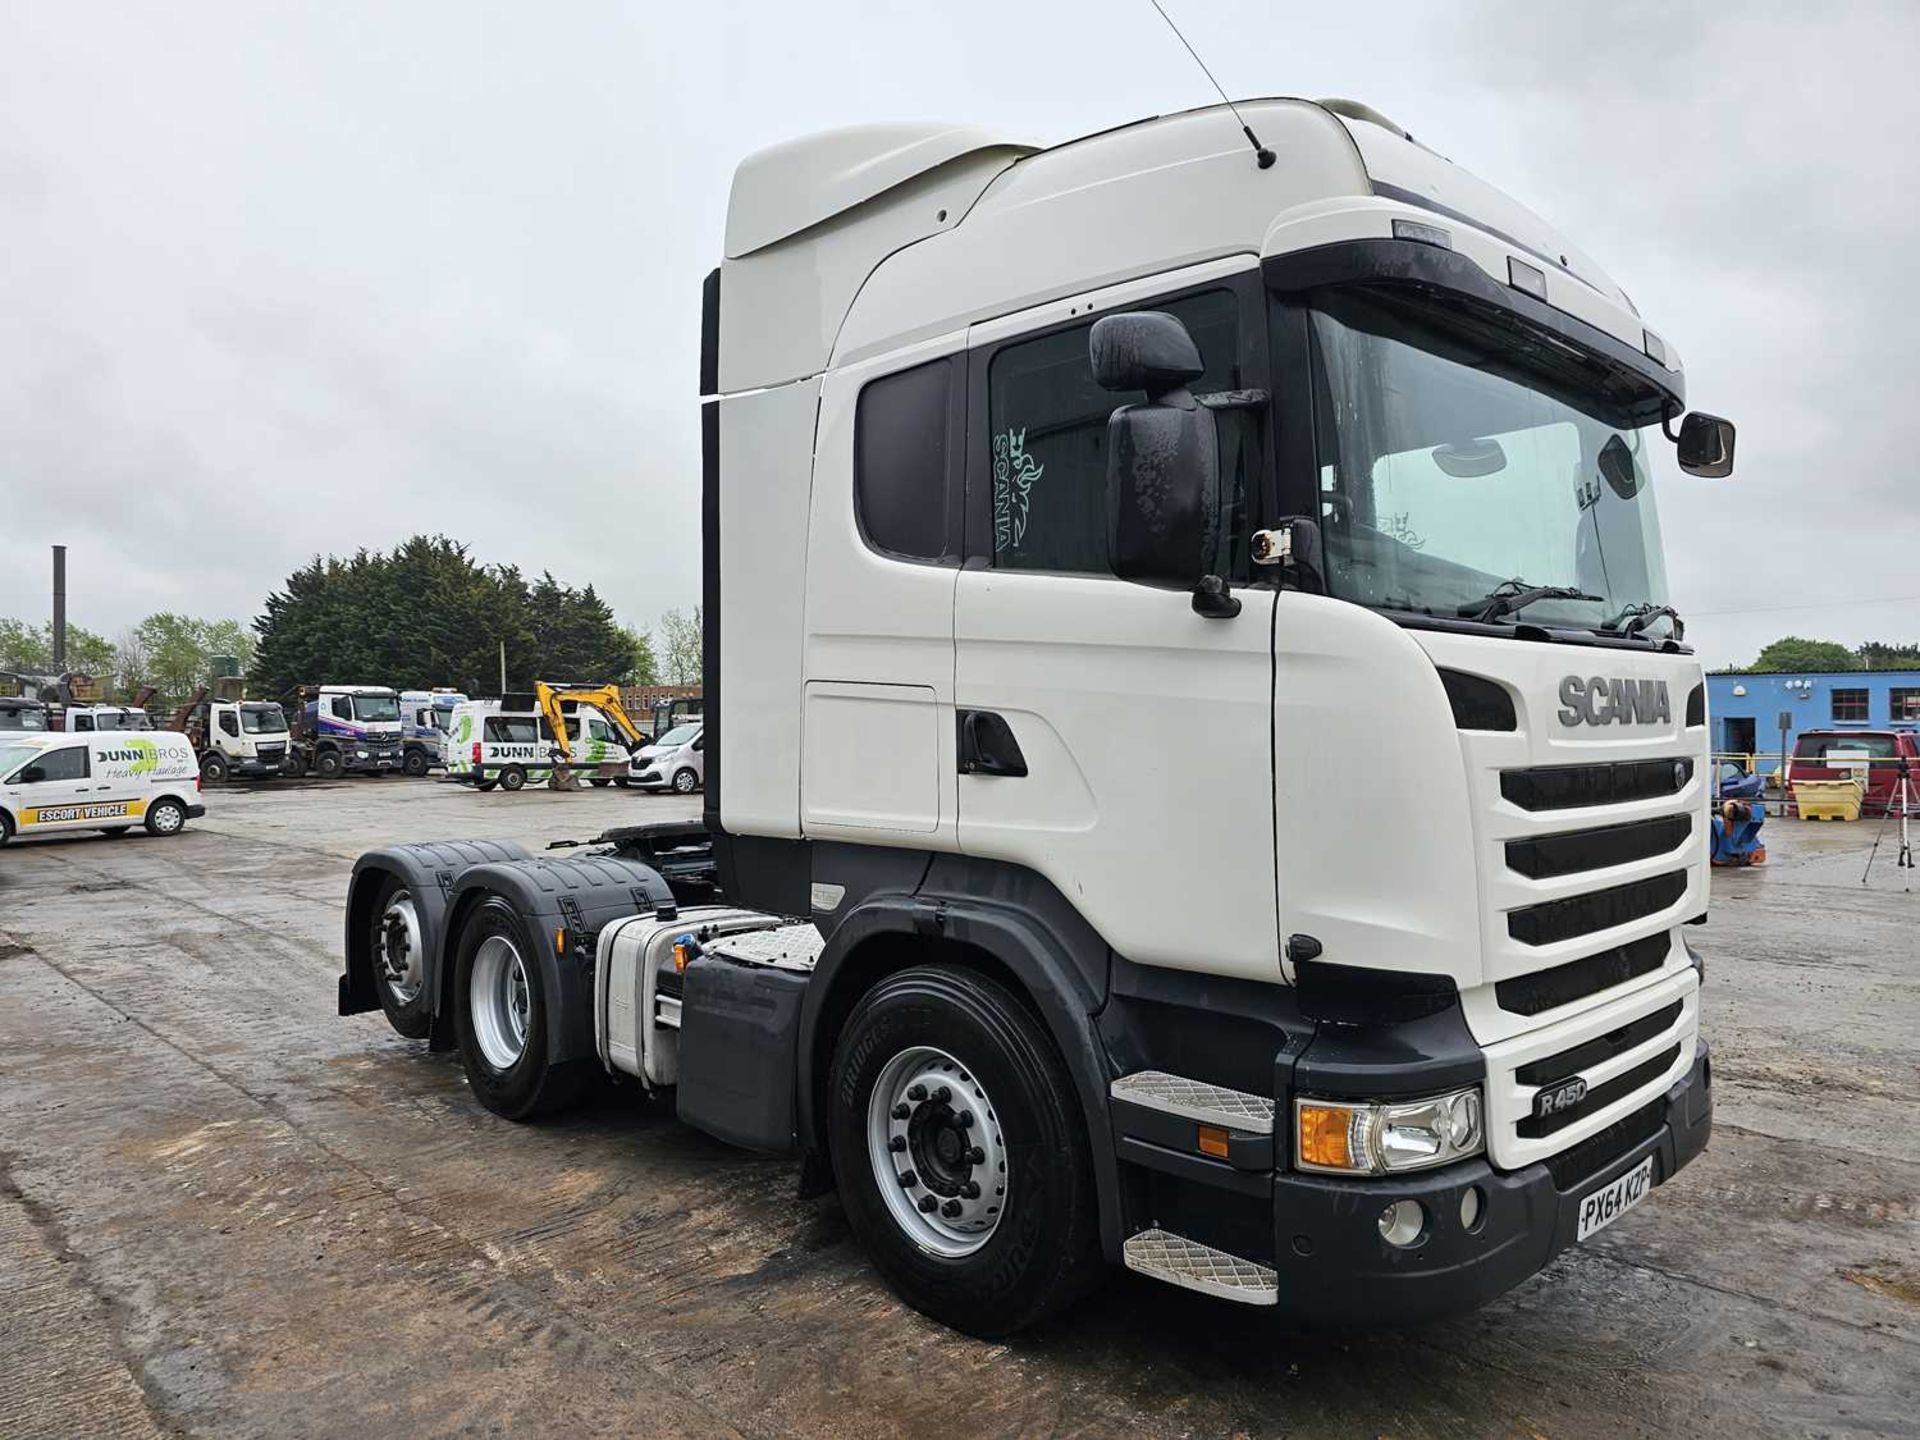 2014 Scania R450 6x2 Rear Lift, Tipping Gear, Blind Spot Camera, A/C, Automatic Gearbox - Image 7 of 22